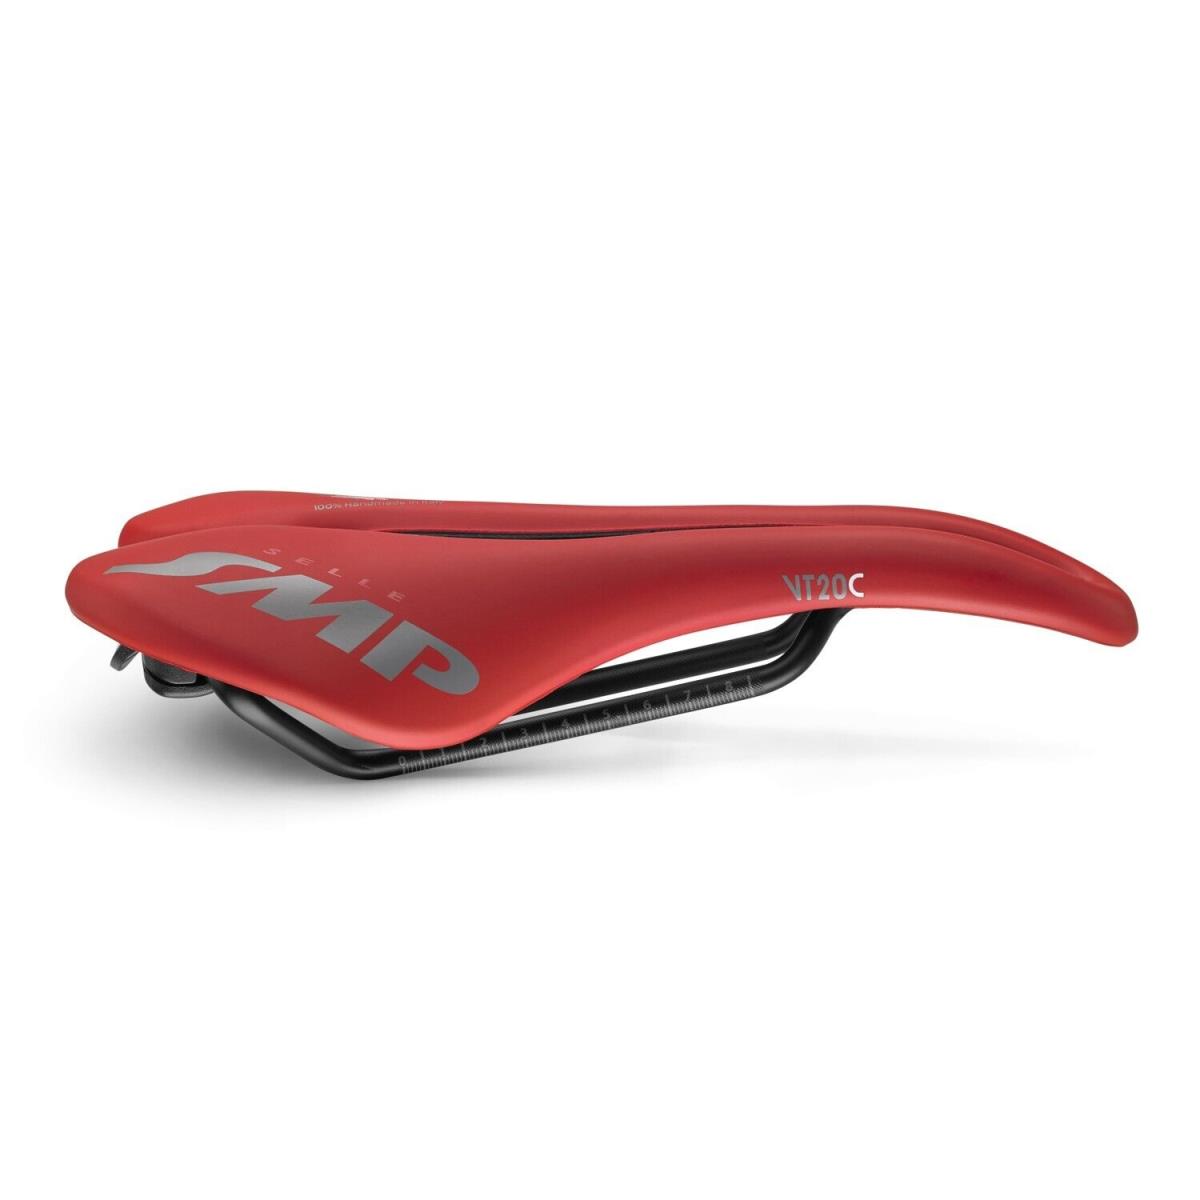 2023 Selle Smp VT20C Saddle : Velvet Touch Red - Made IN Italy